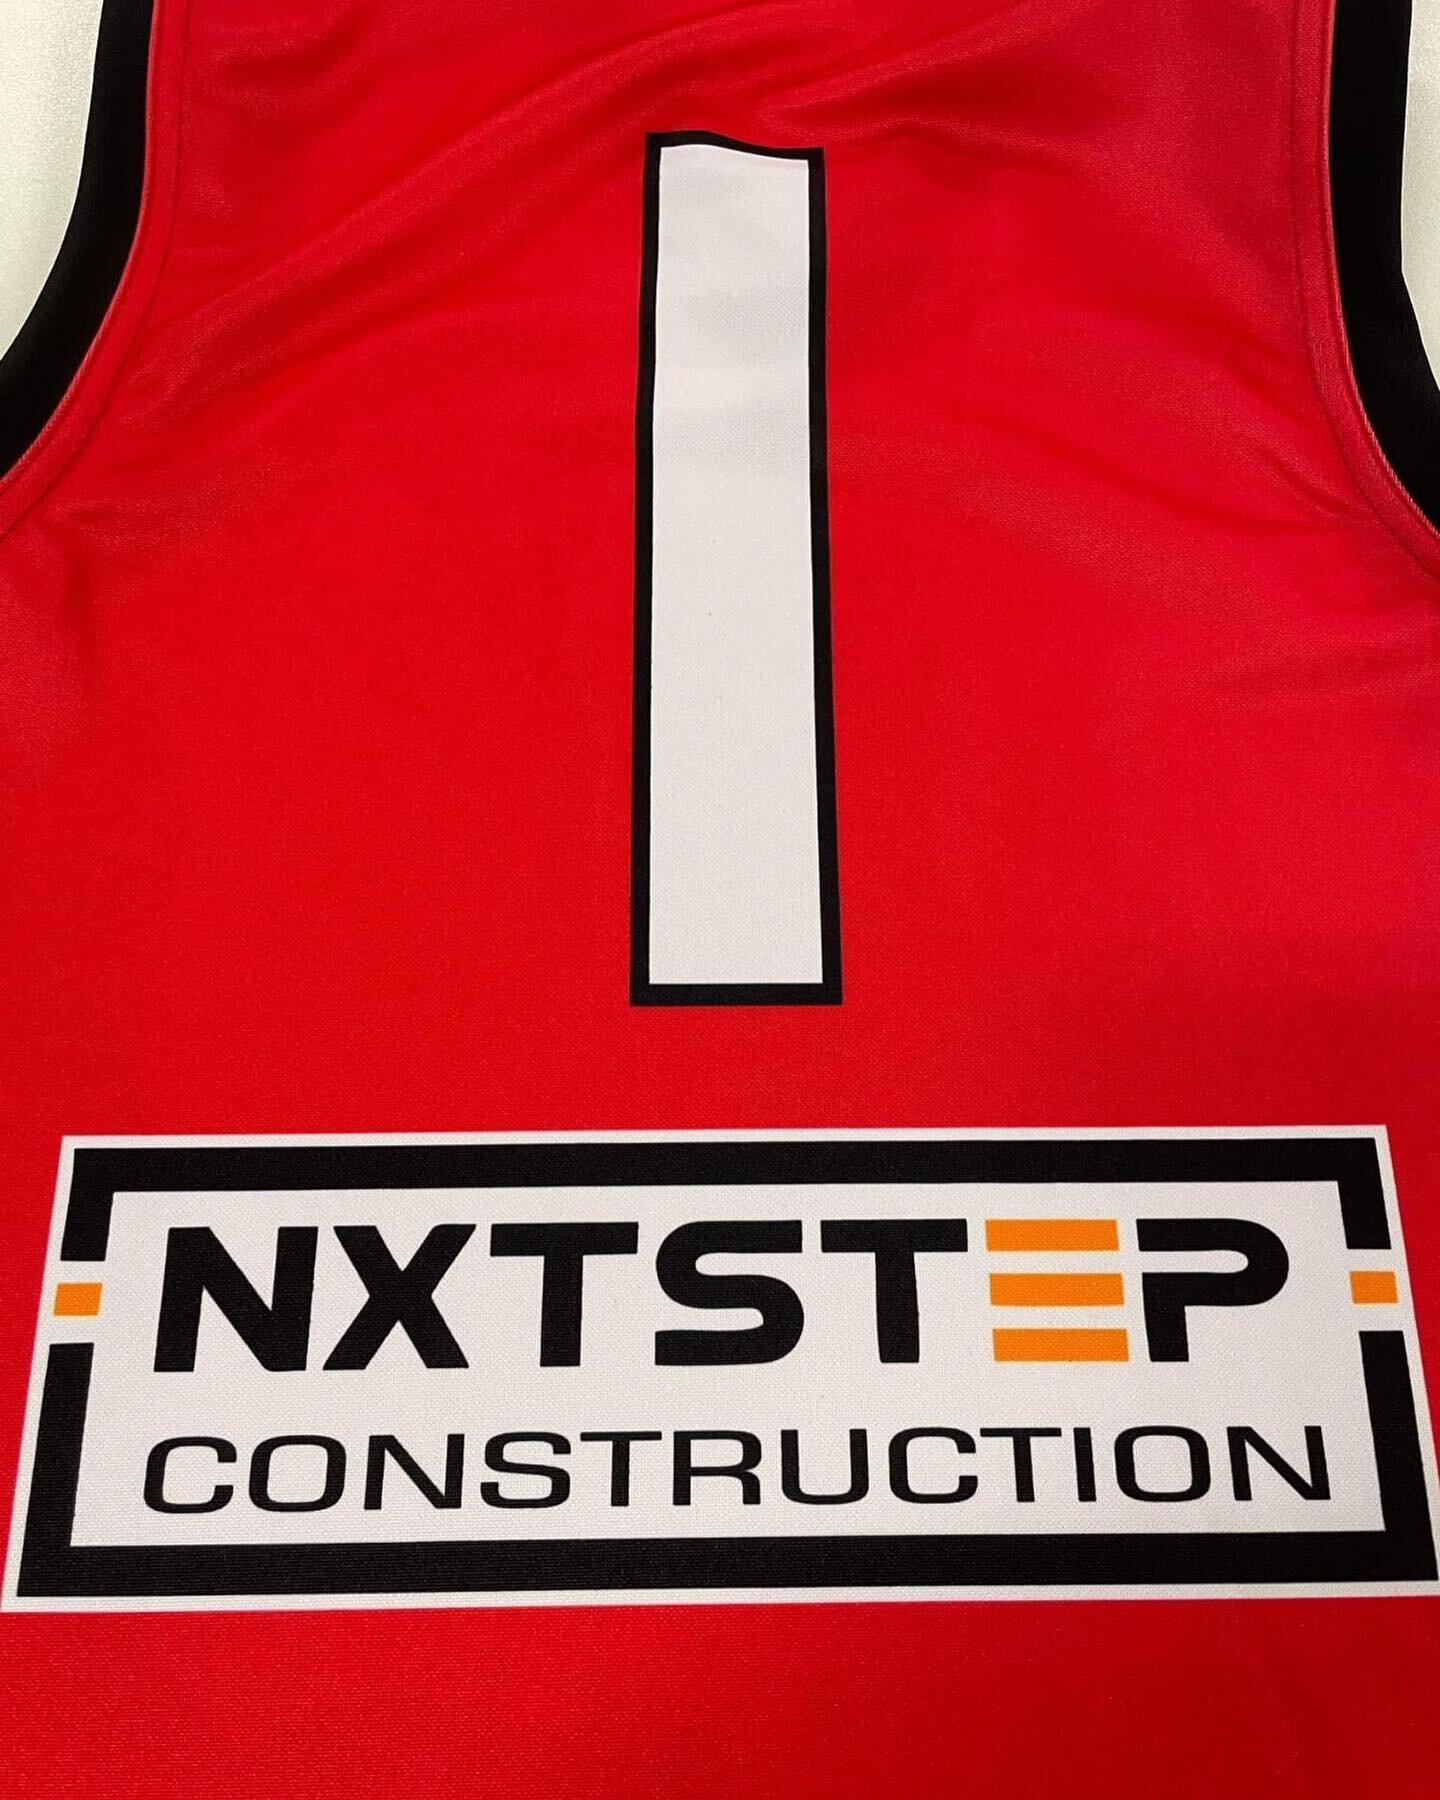 Thankyou to the YPFL for the opportunity to sponsor this weekends #nutriencup guernseys - proud to play our part in local football. 

Congratulations to everybody selected and Goodluck on Saturday 🥇🏆